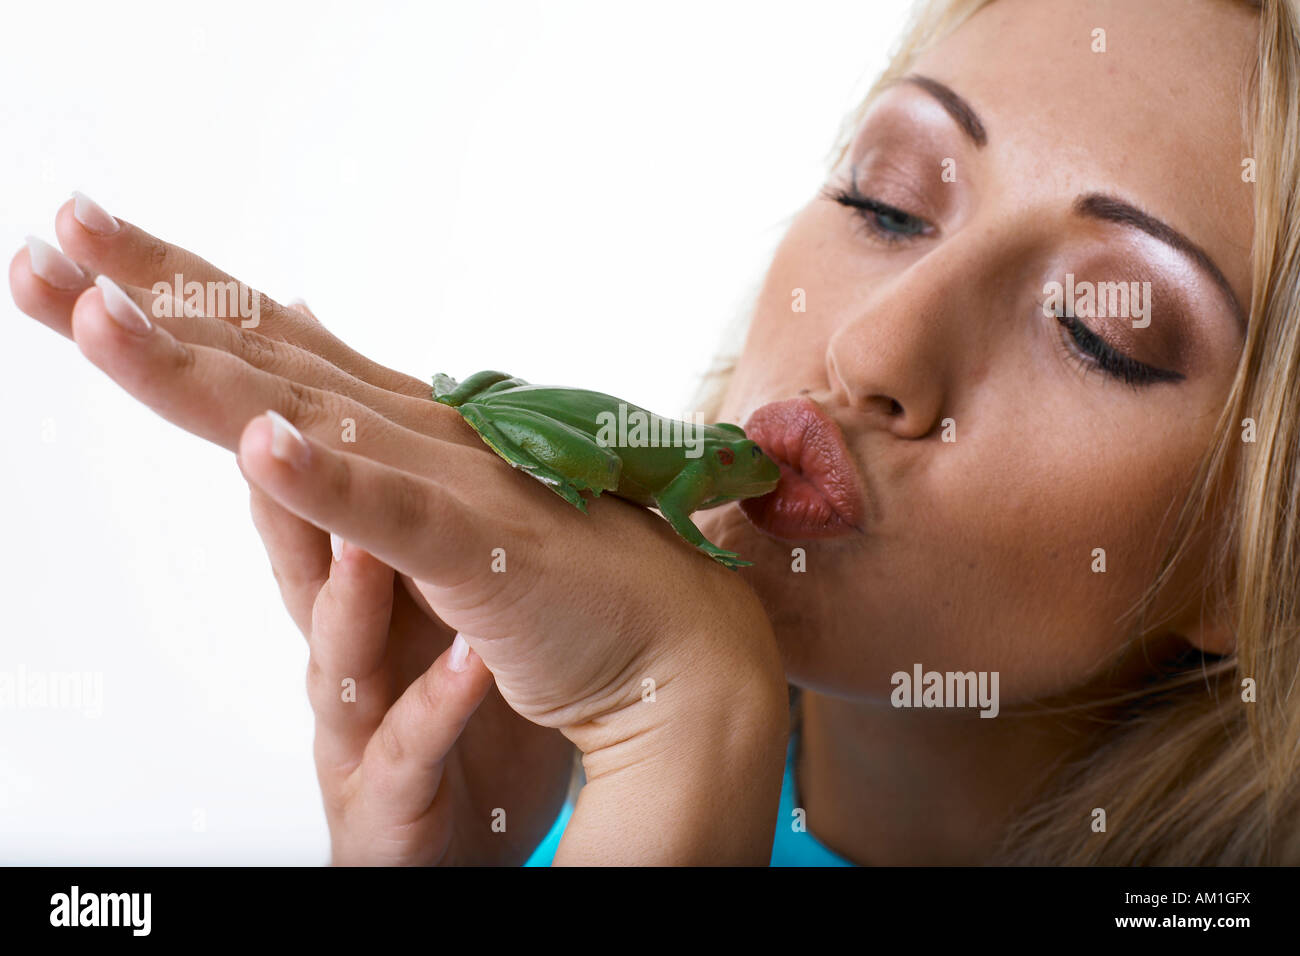 A young woman is kissing a frog Stock Photo